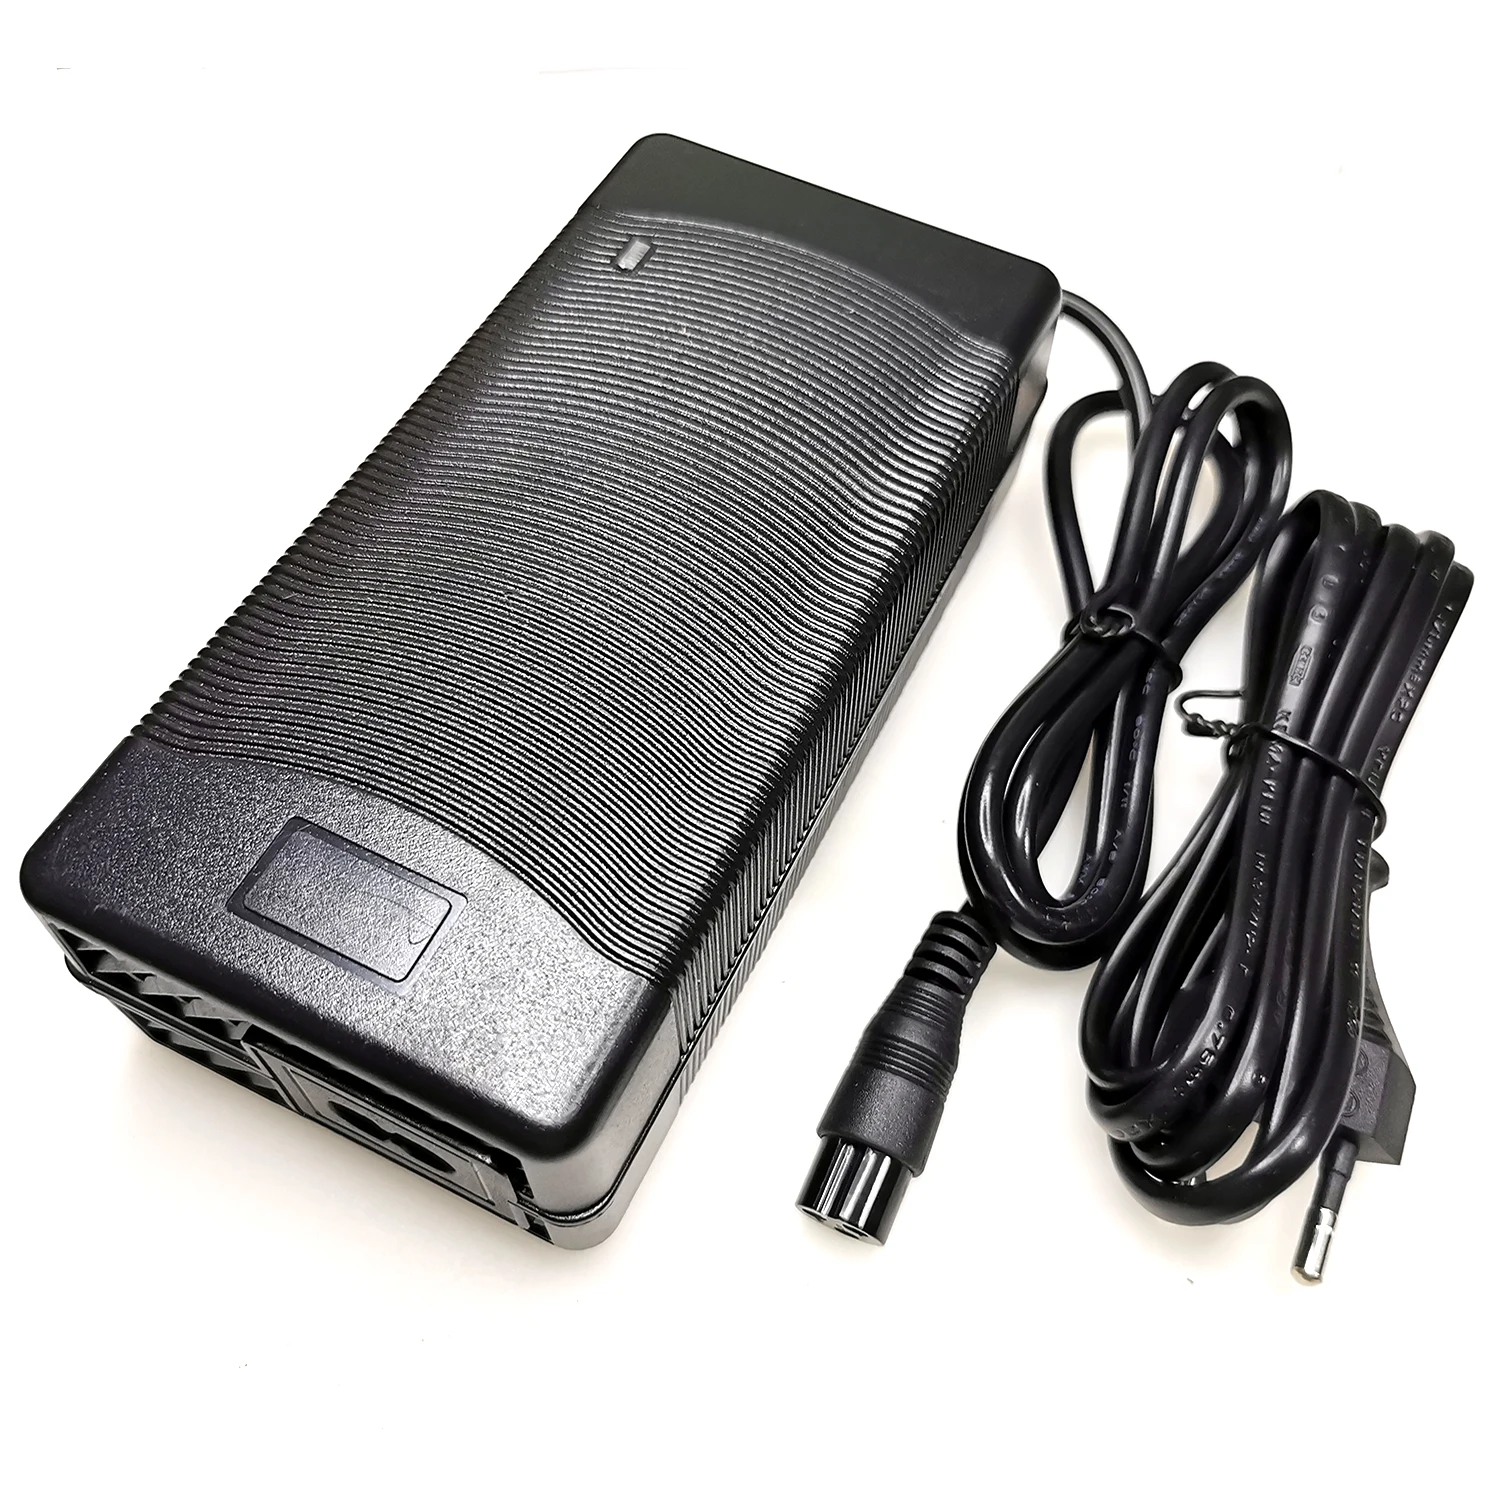 67.2V 2A Li-ion Battery Charger for 16S 60V e-bike electric bicycle  Wheelbarrow Electric self balancing unicycle scooter Charger